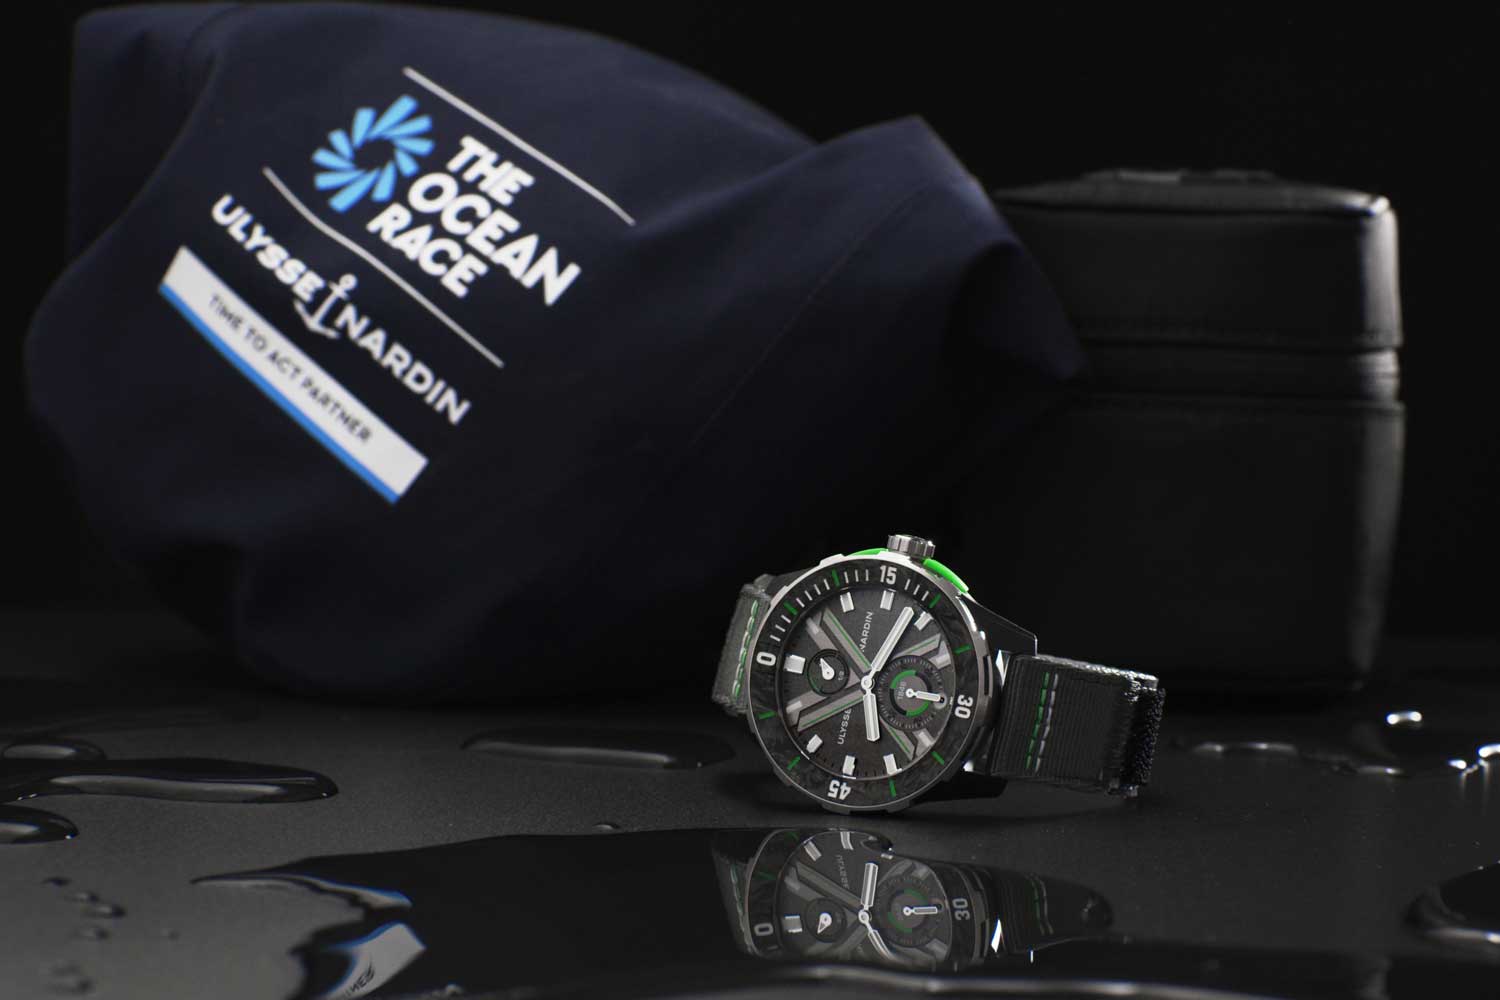 The Ulysse Nardin Diver: The Ocean Race is presented in an R-PET pouch and a Helly Hansen textile recycled bag.